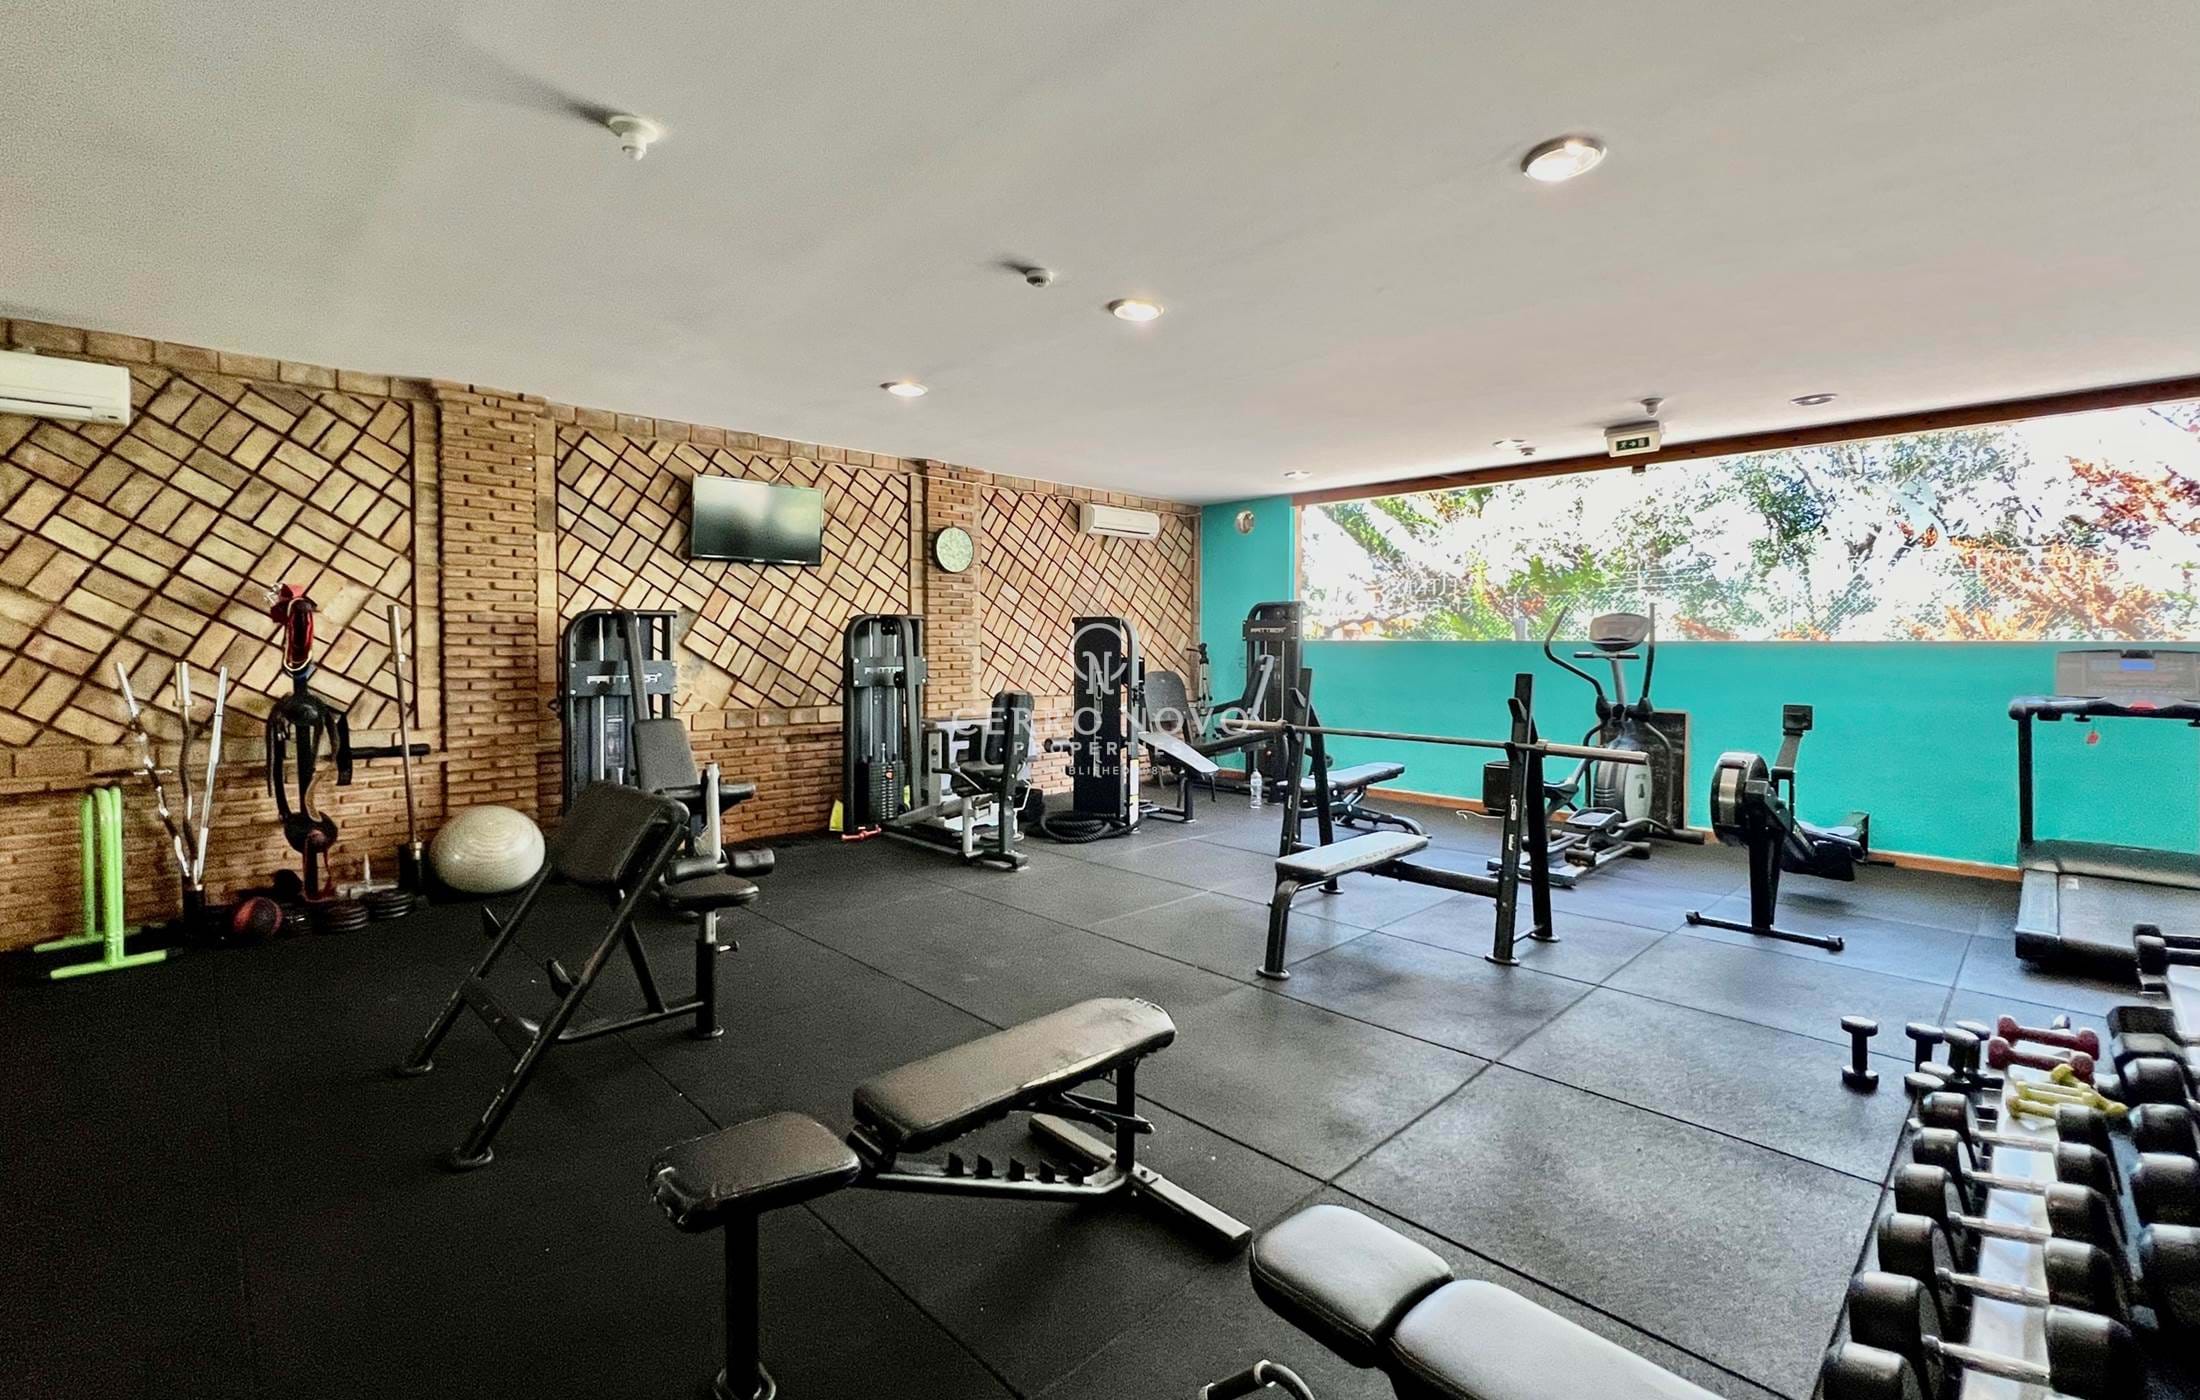 Unique loft-style home with gym, tennis court and private pool